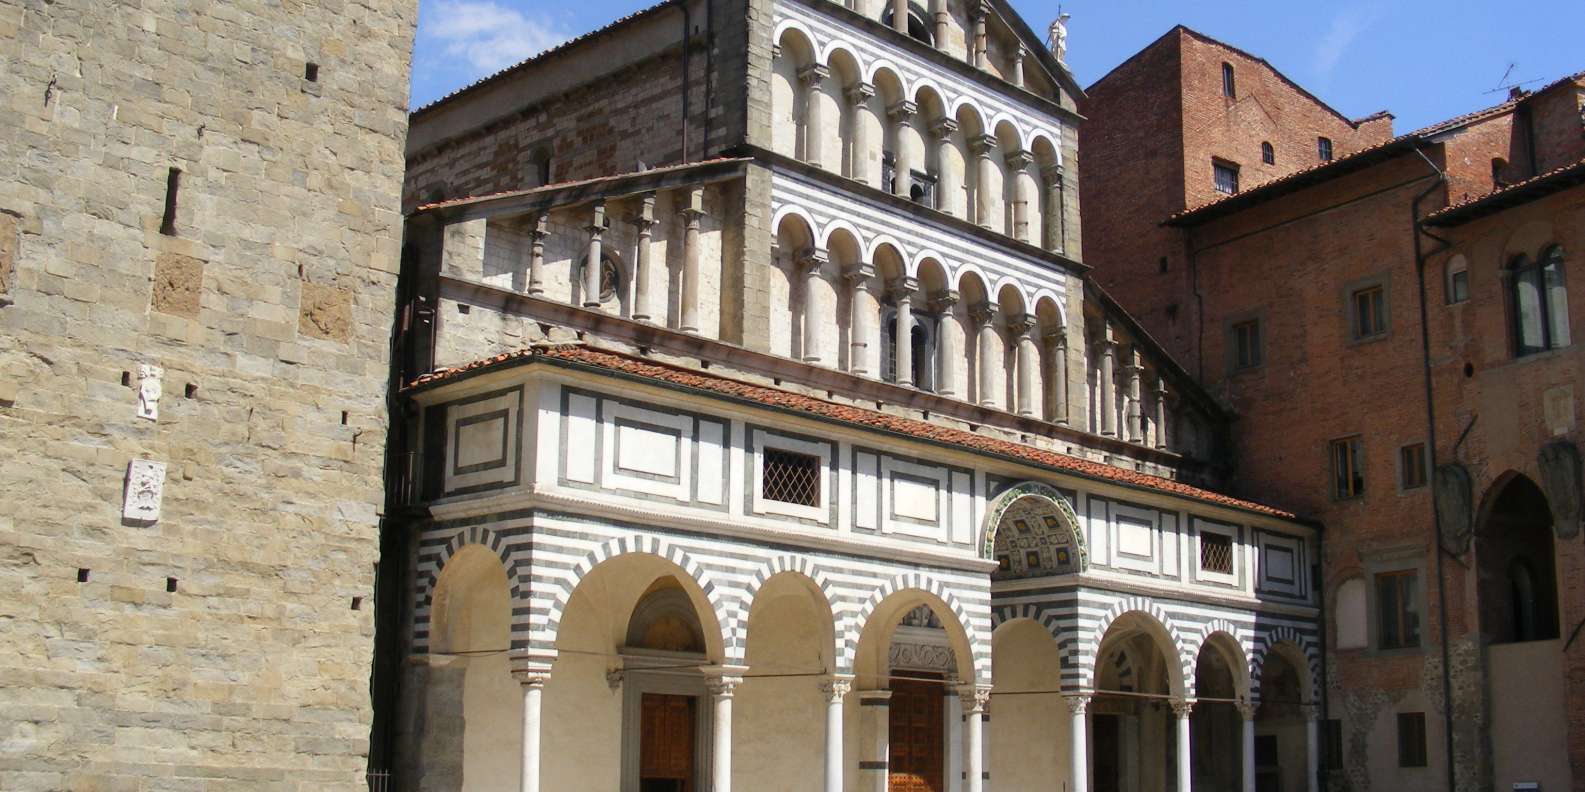 What to do in Pistoia